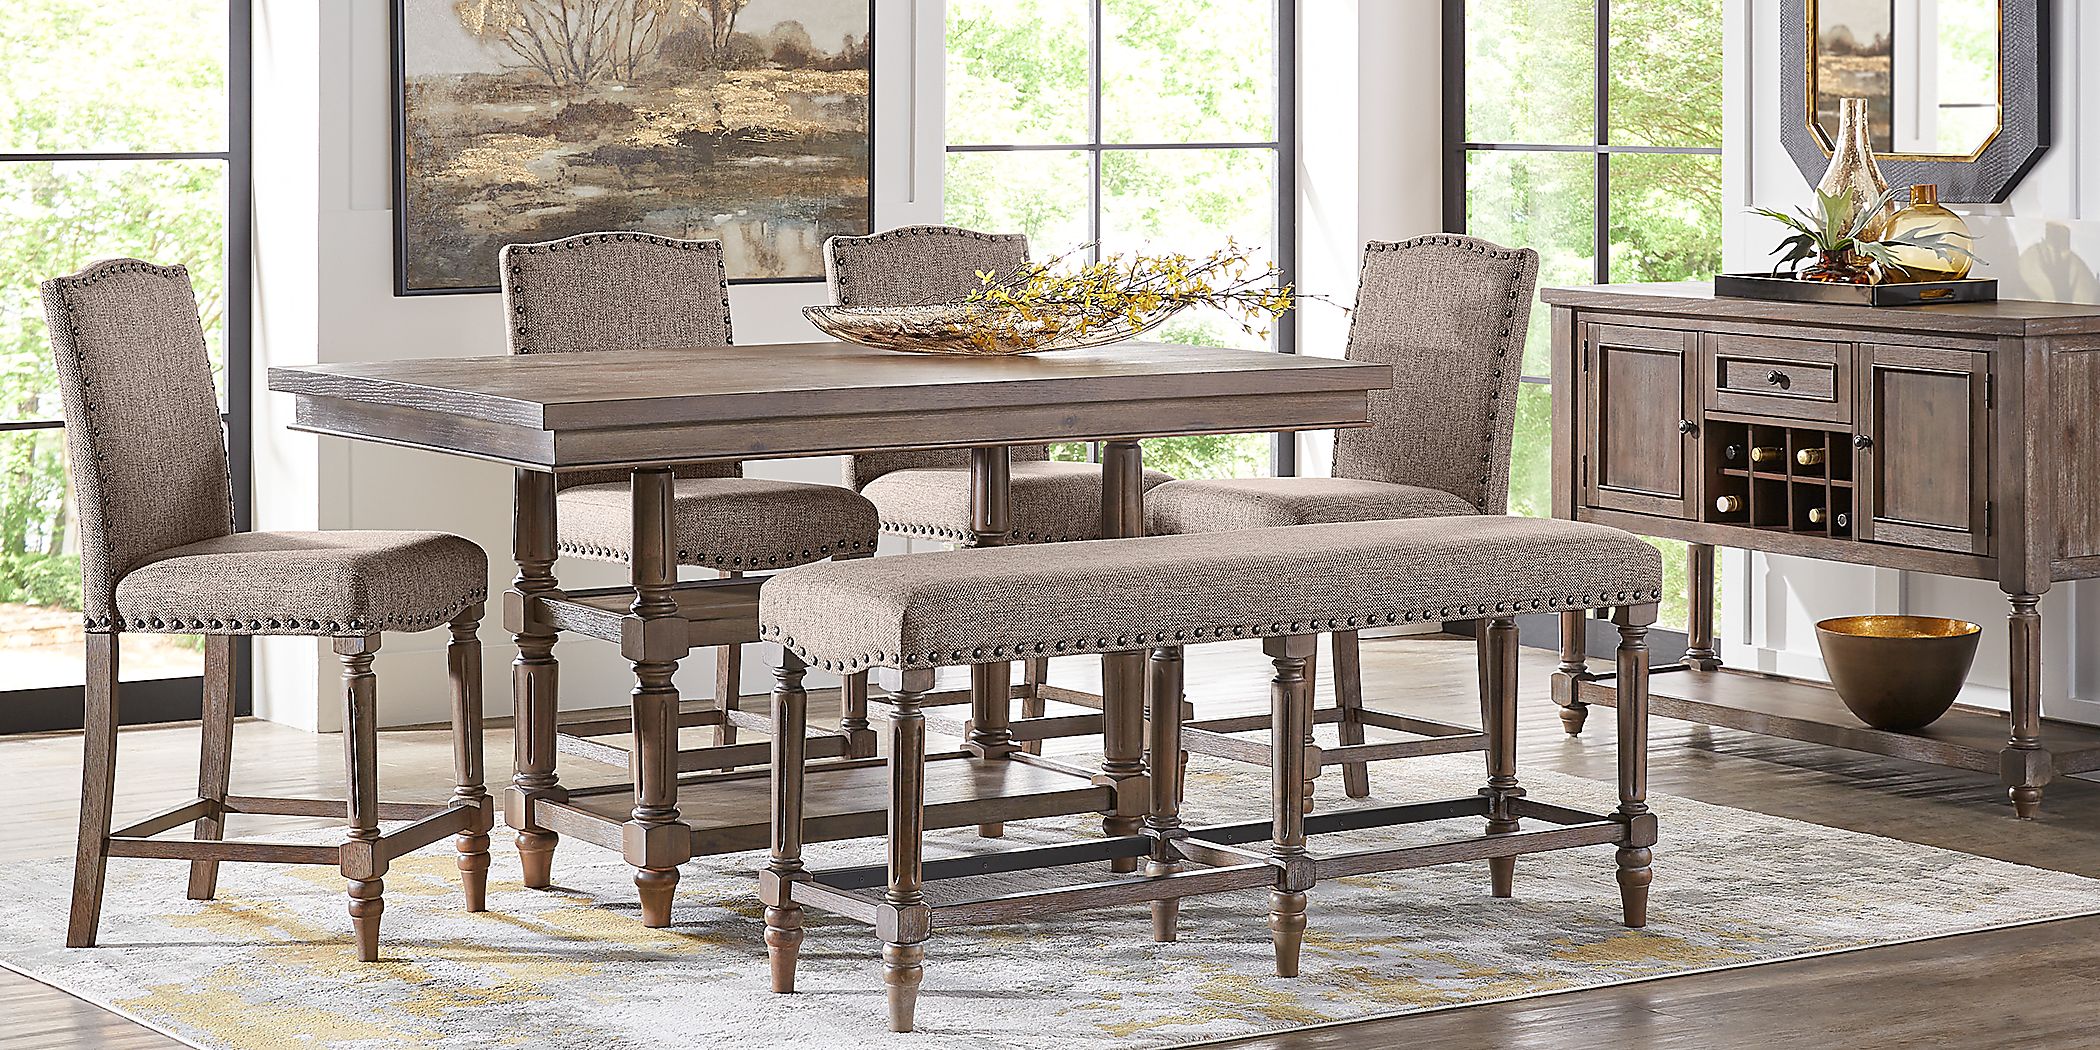 Melian Woods Brown 5 Pc Counter Height Dining Room